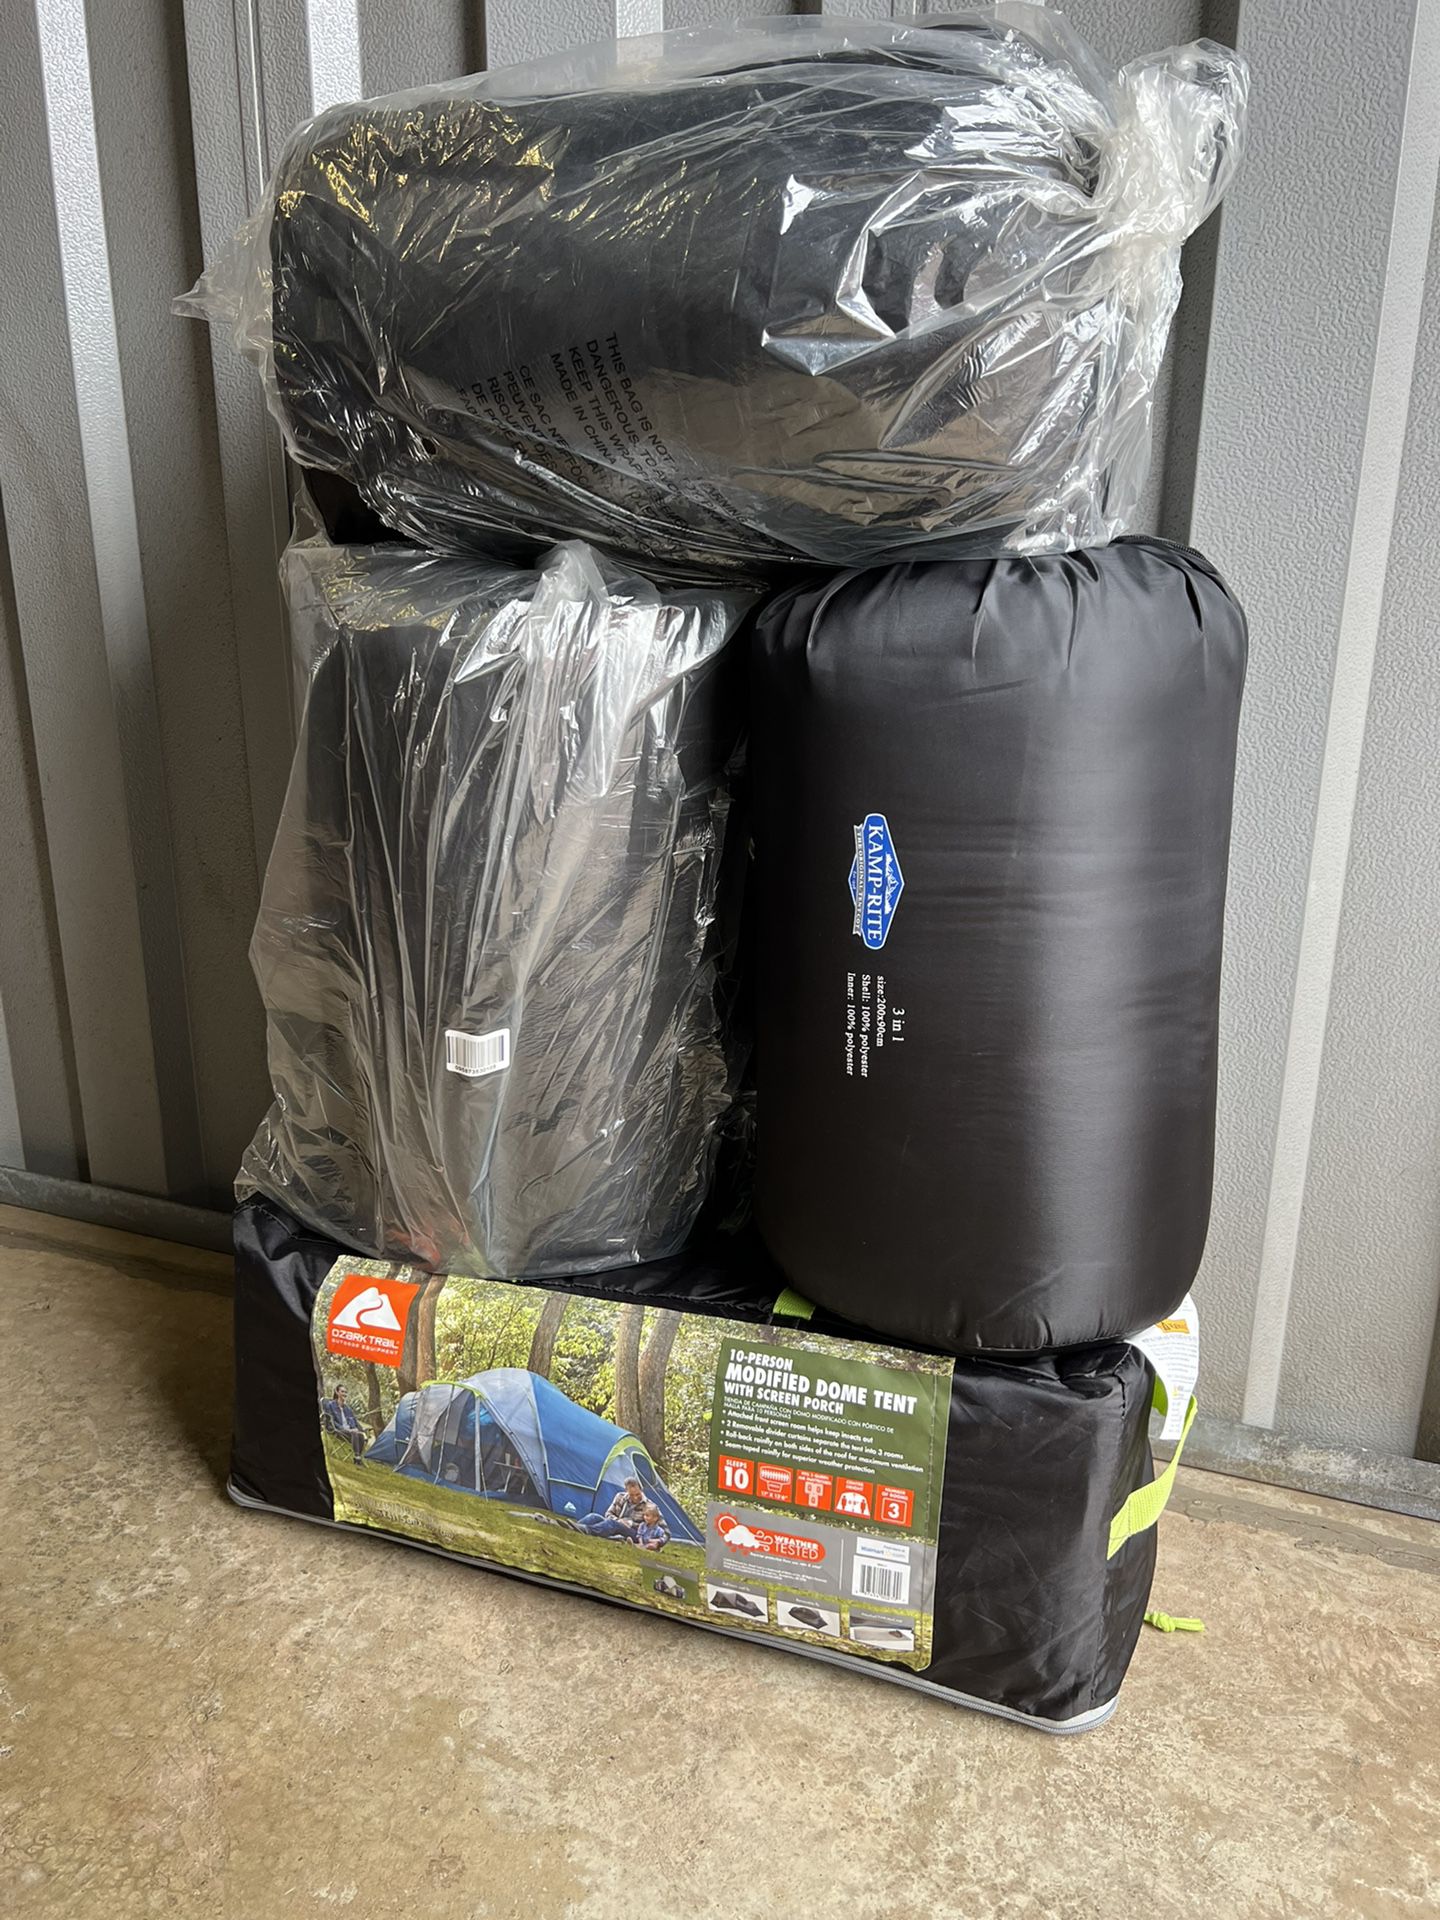 BRAND NEW OZARK TRAIL 10 PERSON MODIFIED DOME TENT WITH SCREEN PORCH AND 3 CAMP RITE SLEEPING BAG SIZE 200x90 cm  FOR SALE  